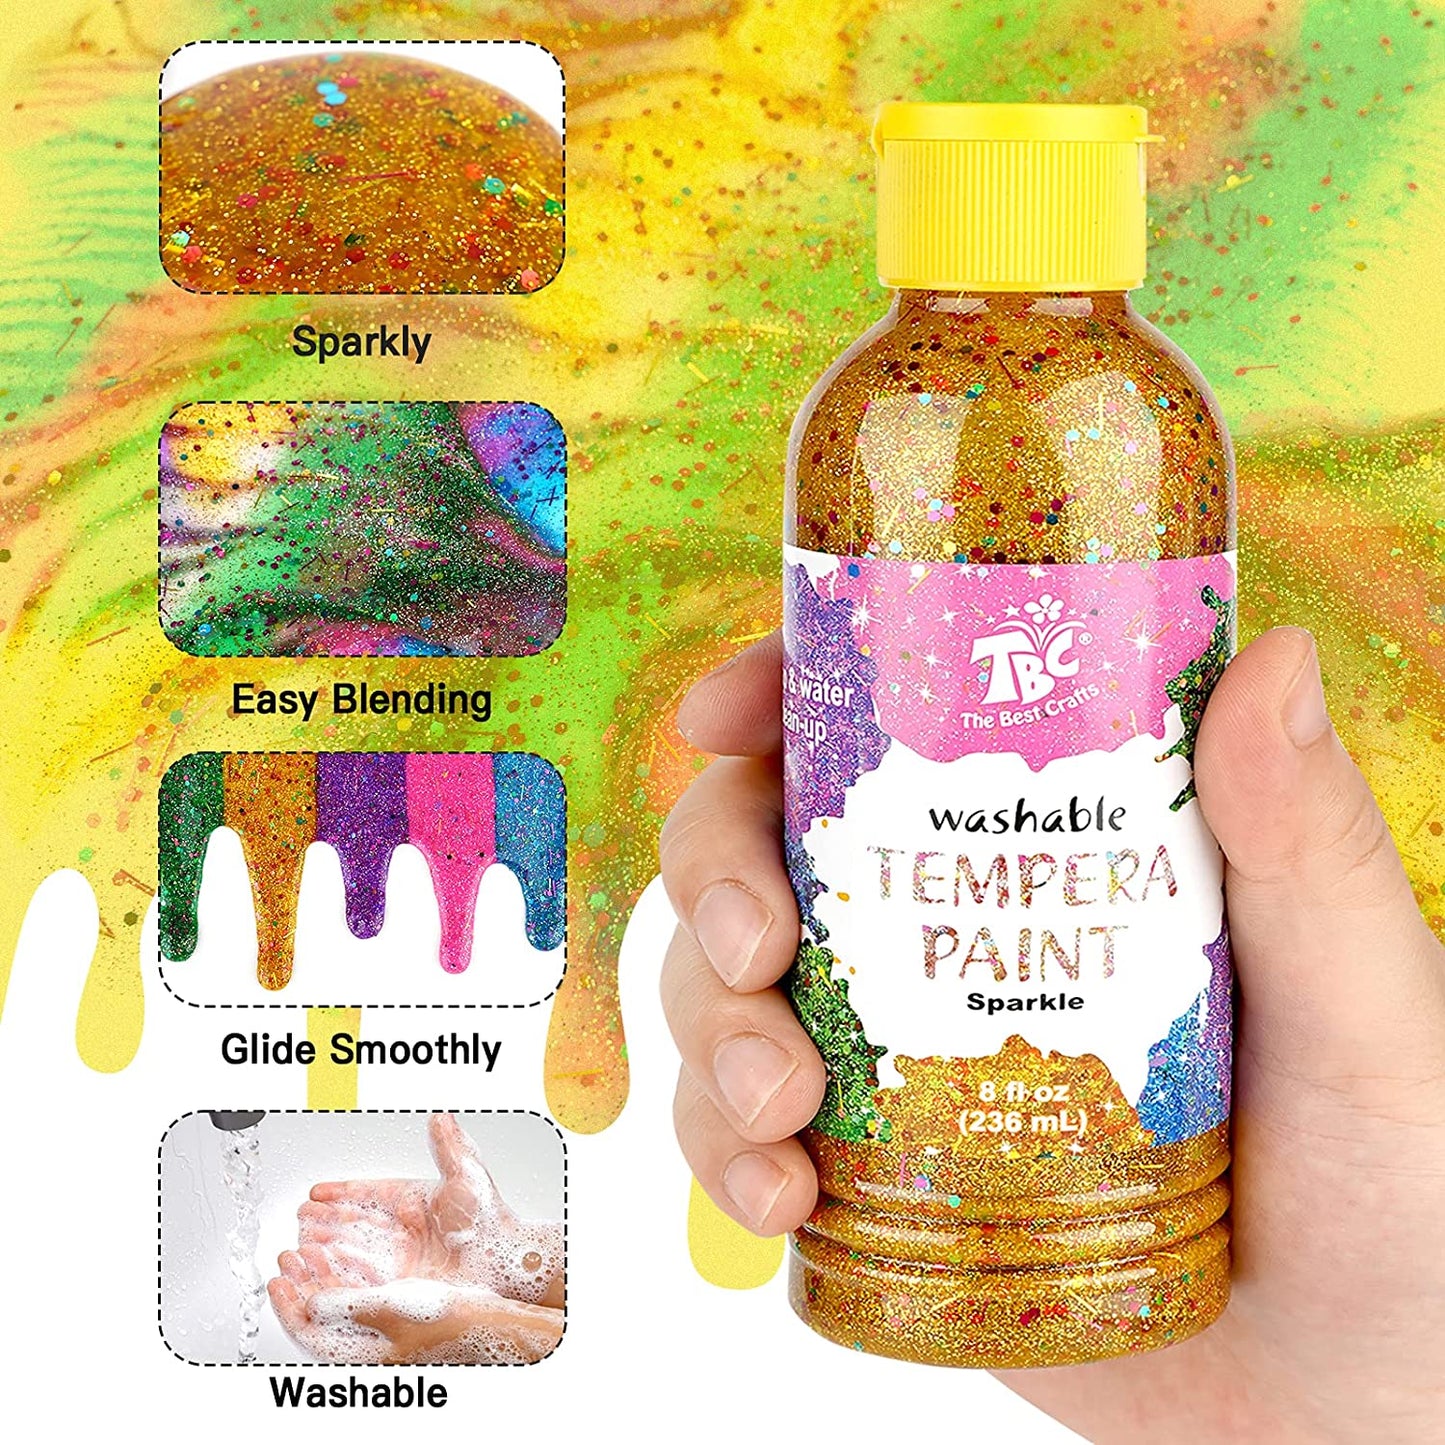 The TBC washable sparkle Tempera paint is sparkly, blends easily, glides smoothly and is washable - Stationery Island